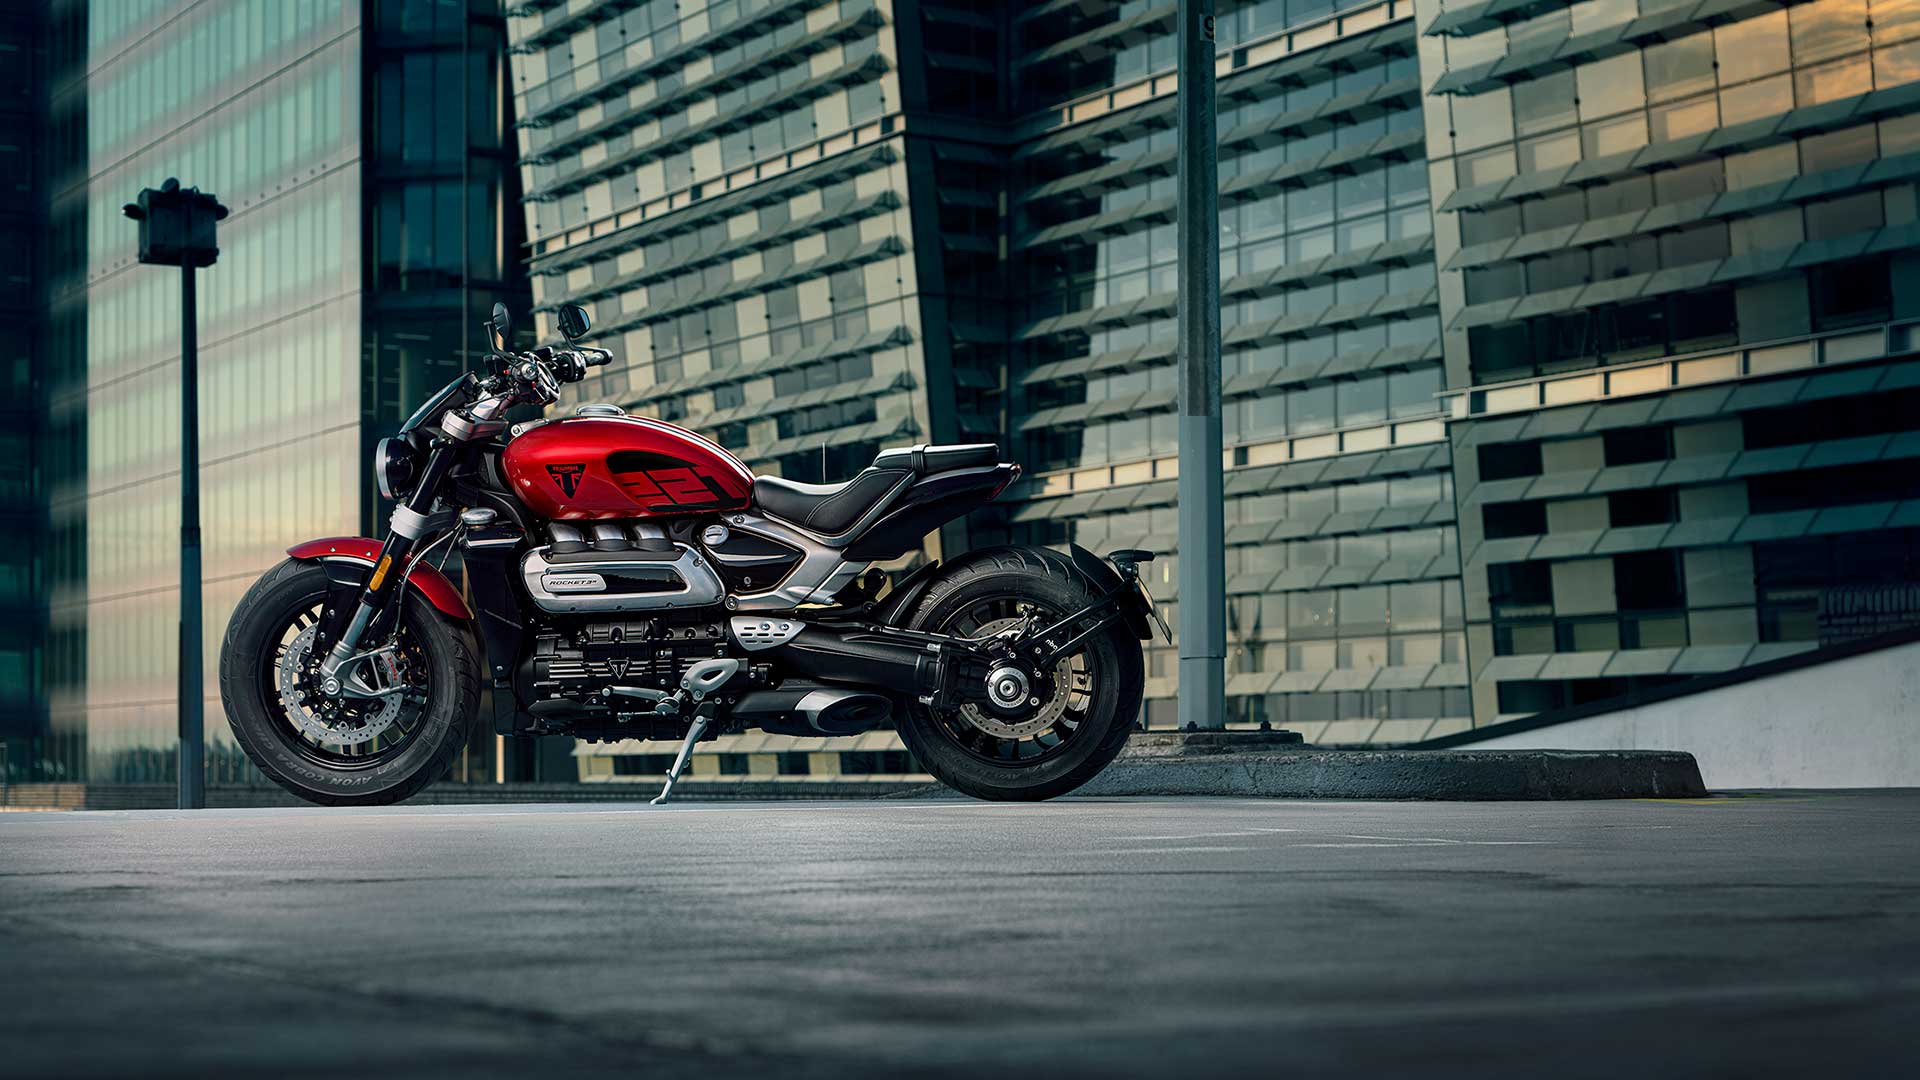 2022 Triumph Rocket 3 R 221 Special Edition in Albany, New York - Photo 5